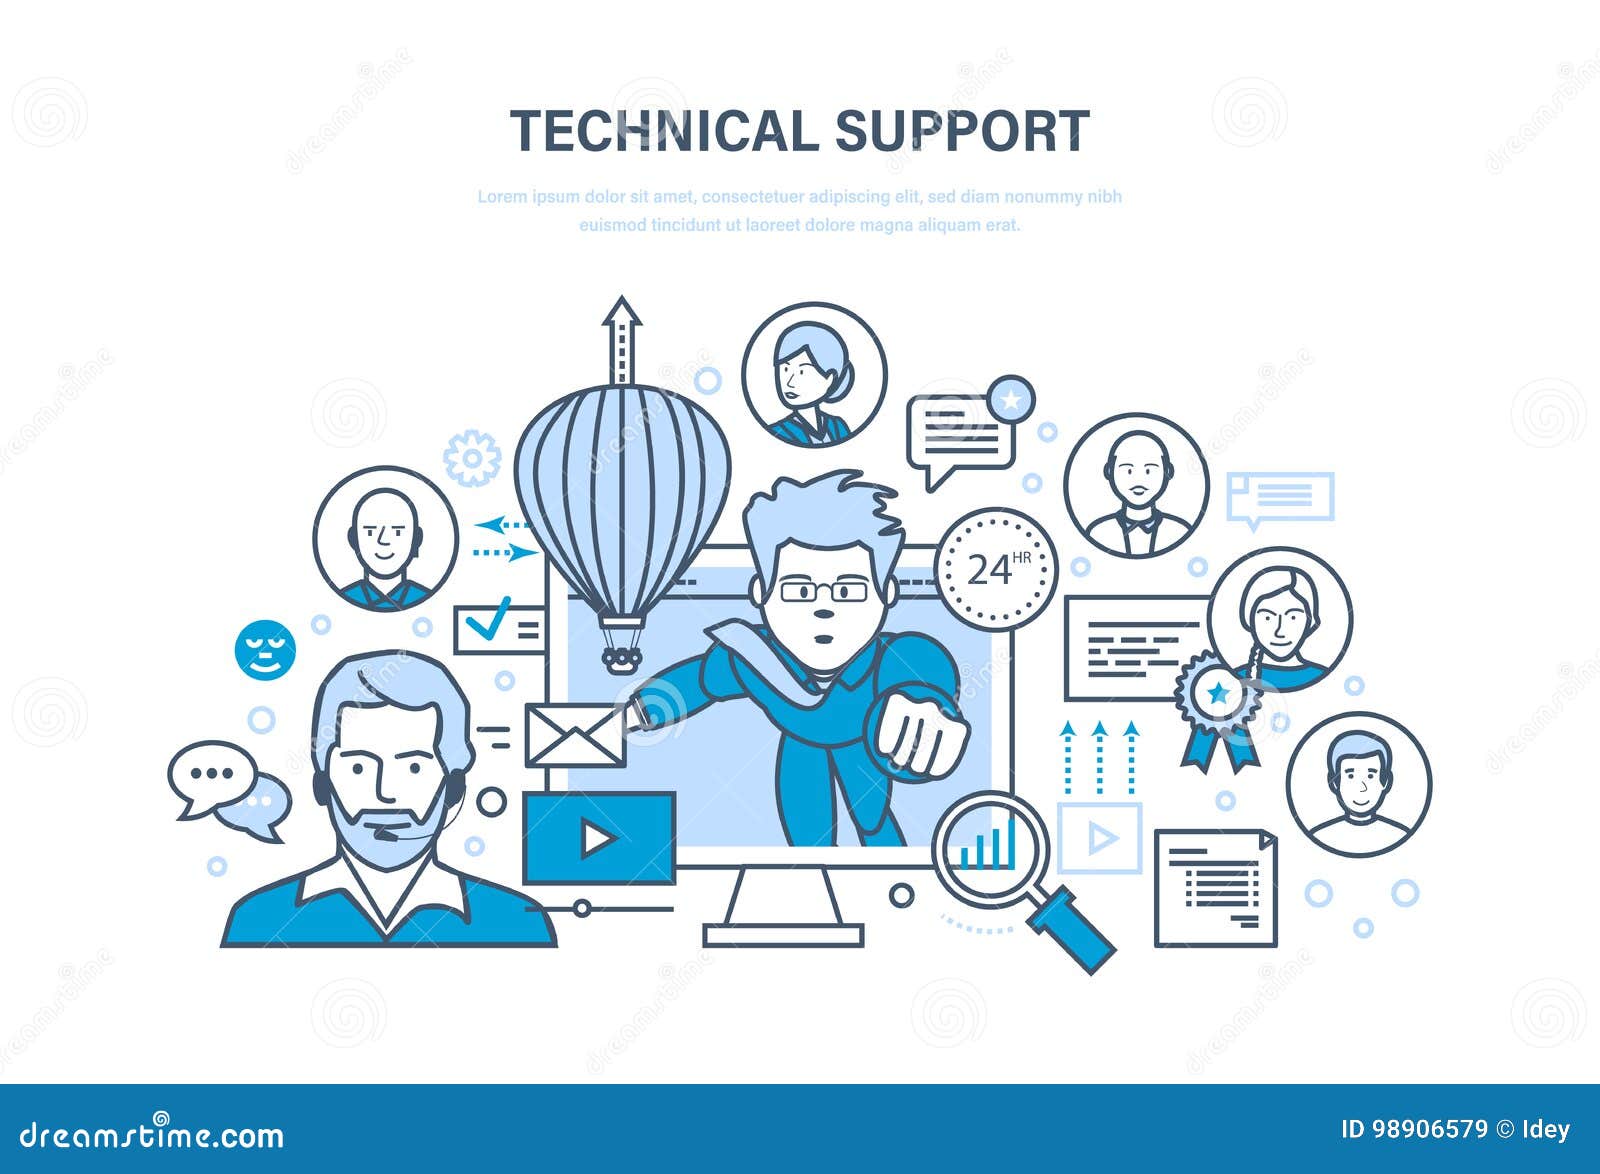 technical support, call center, consultation, information technology, system consulting clients.